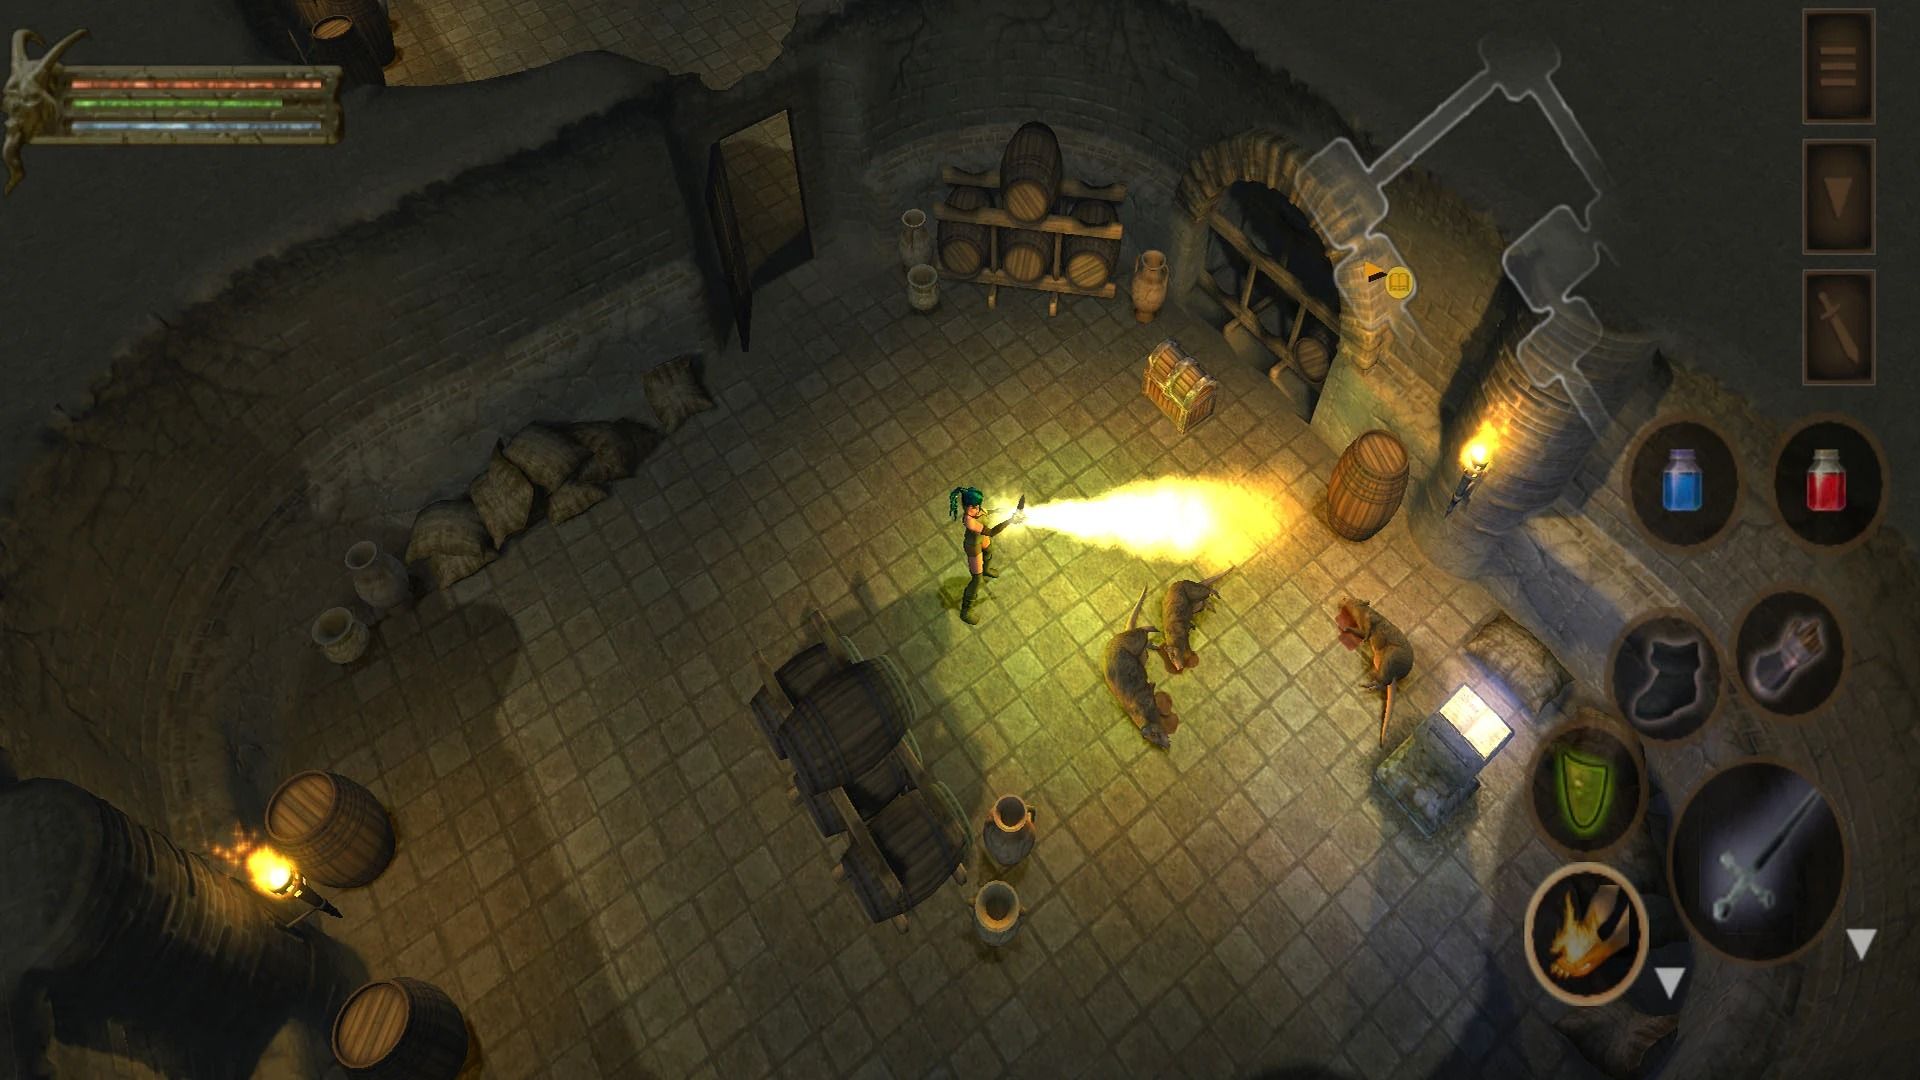 baldur-s-gate-dark-alliance-bring-its-classic-rpg-action-to-android